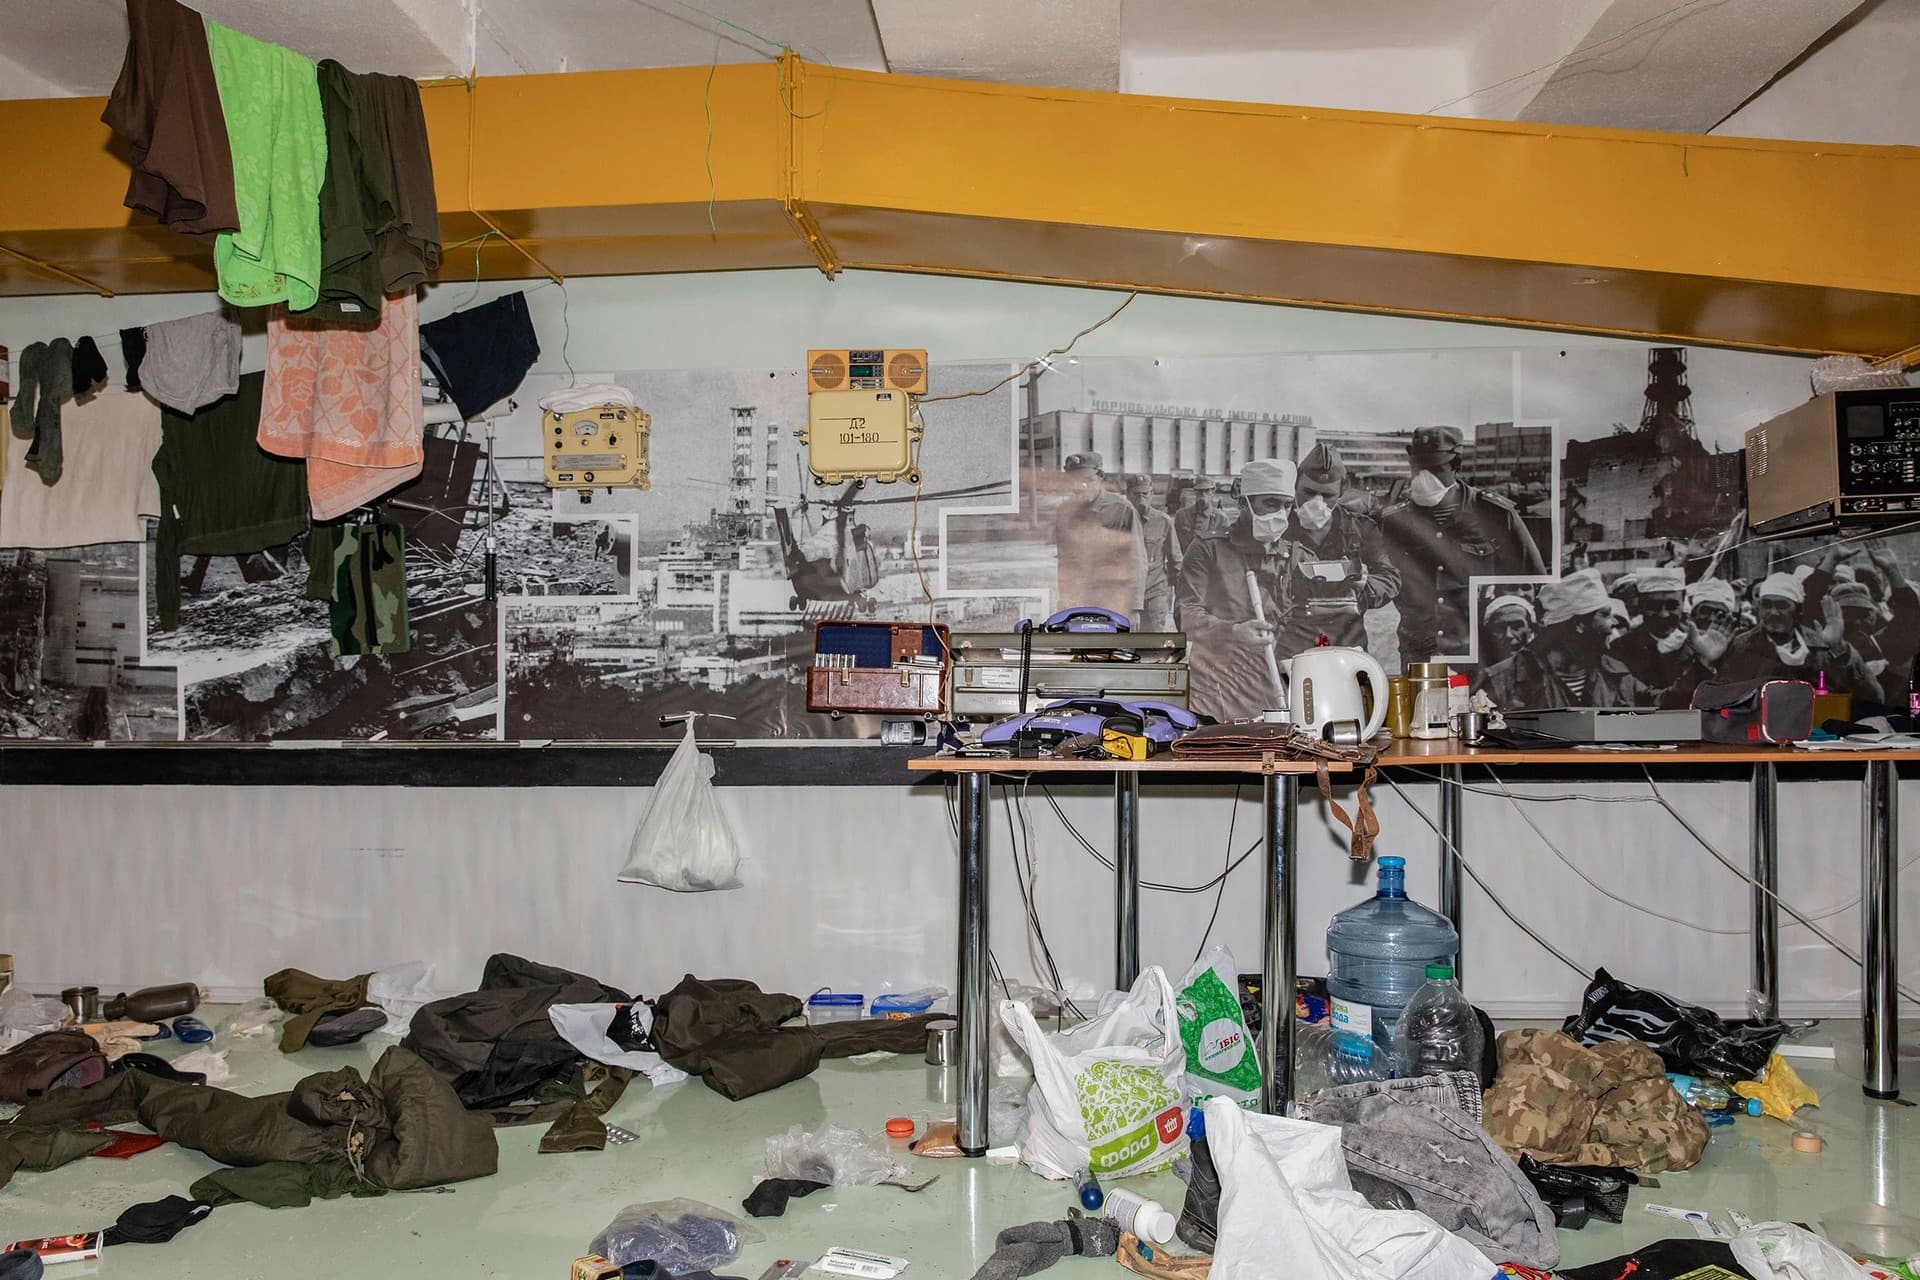 room in an administrative building in the Chernobyl nuclear power plant